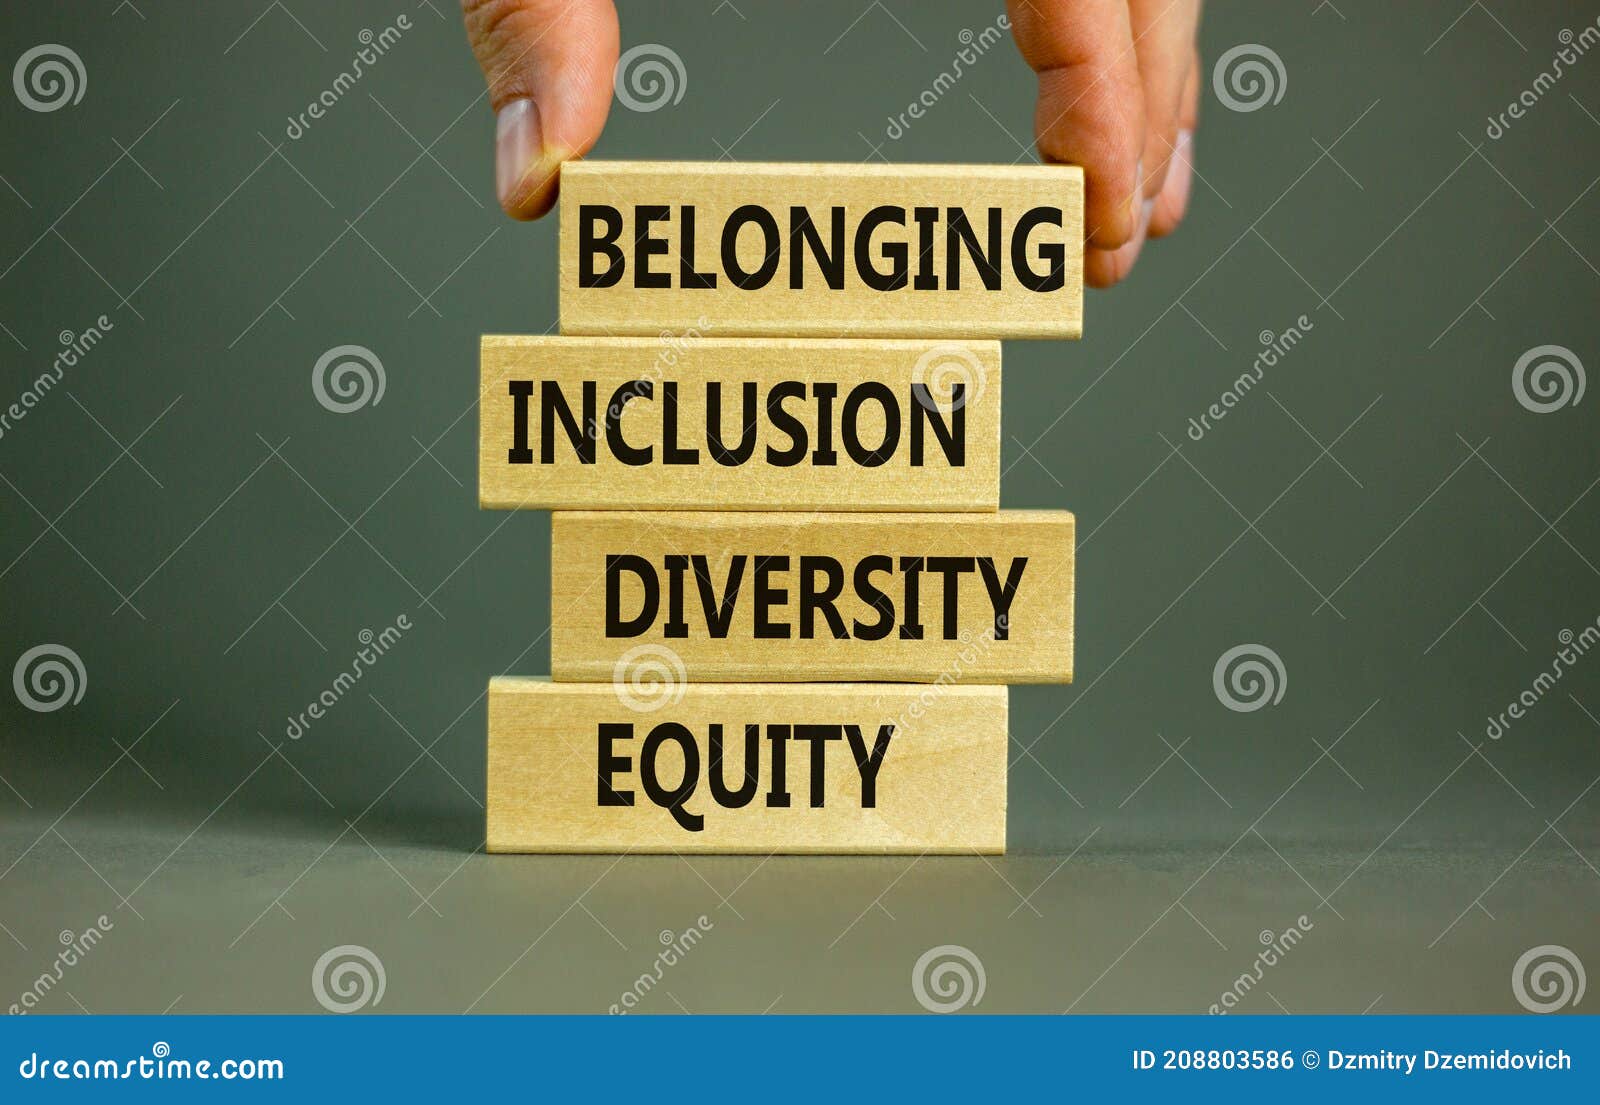 equity  diversity  inclusion and belonging .